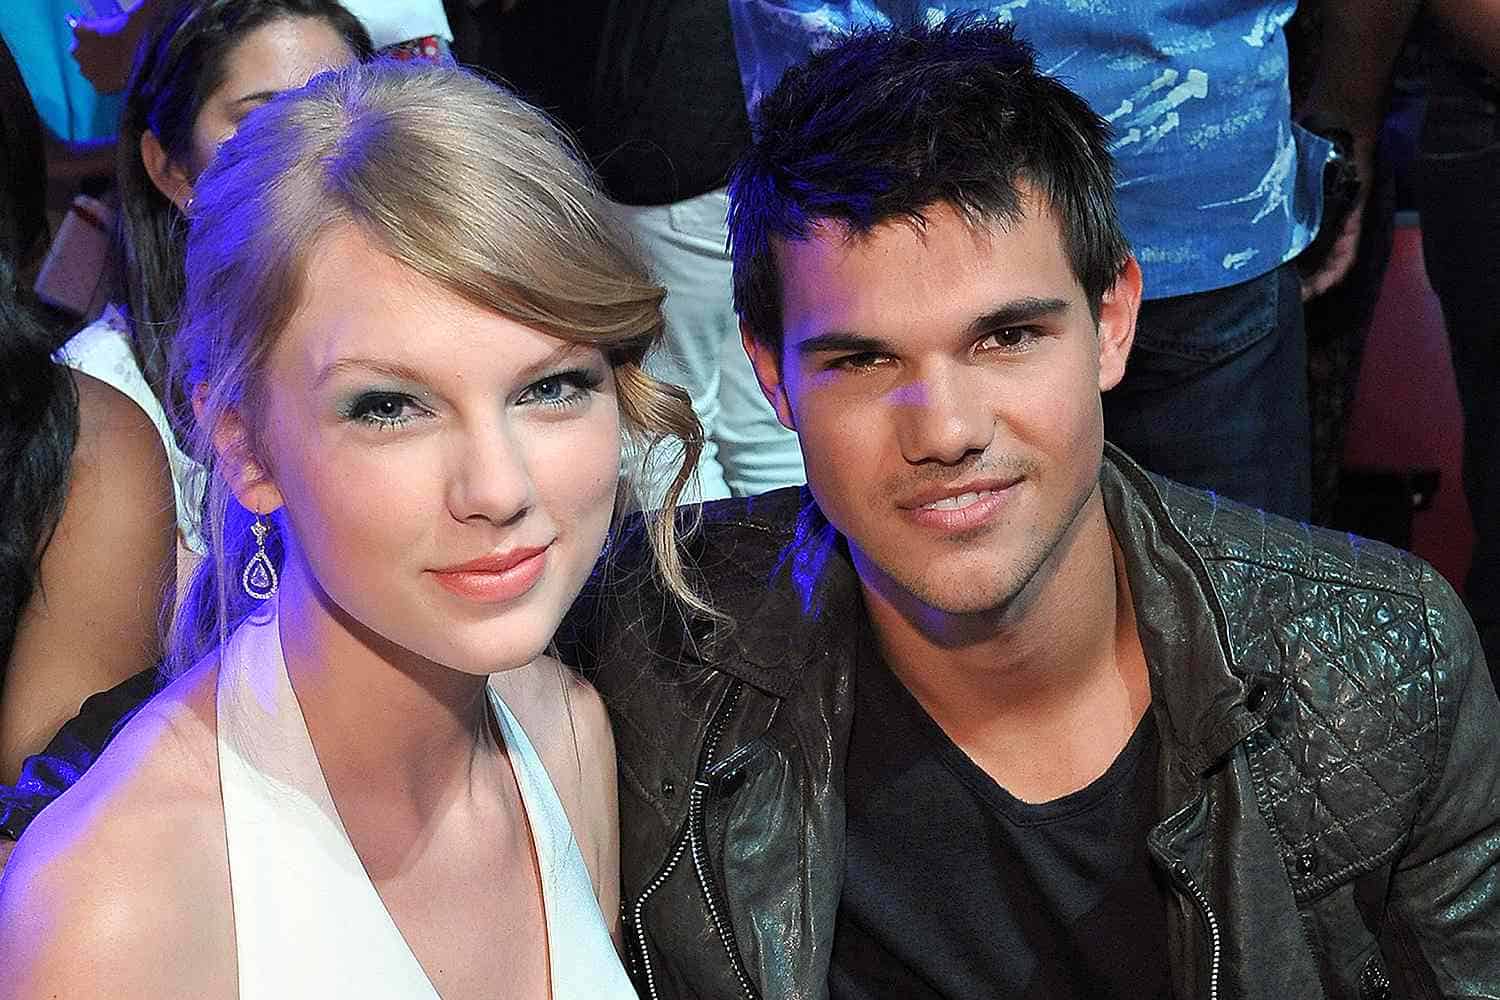 Who Did Taylor Swift Cheat on Taylor Lautner With